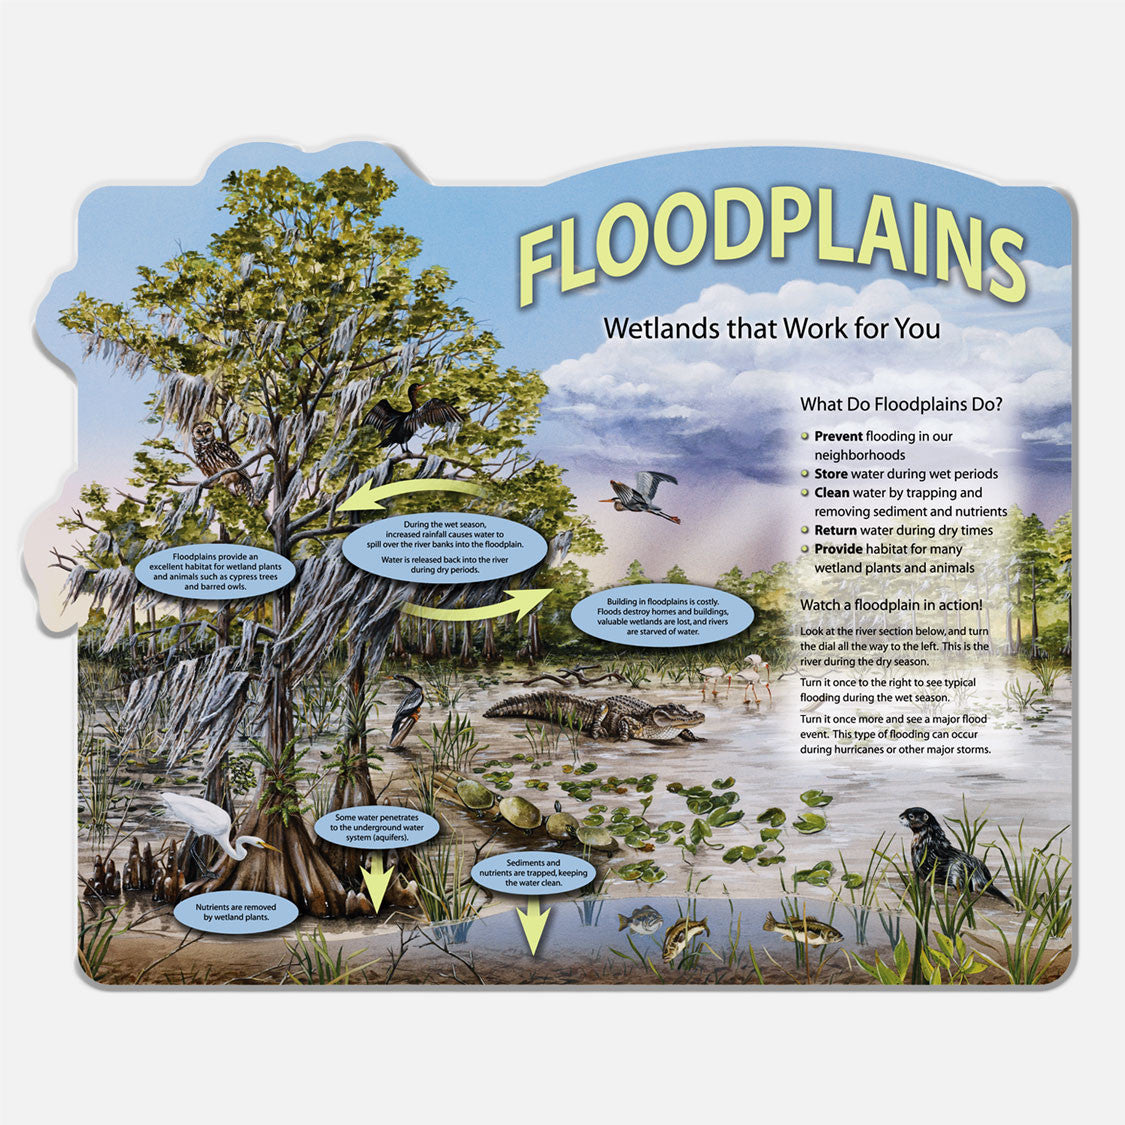 This beautifully illustrated display describes the roles of floodplains and wetlands.